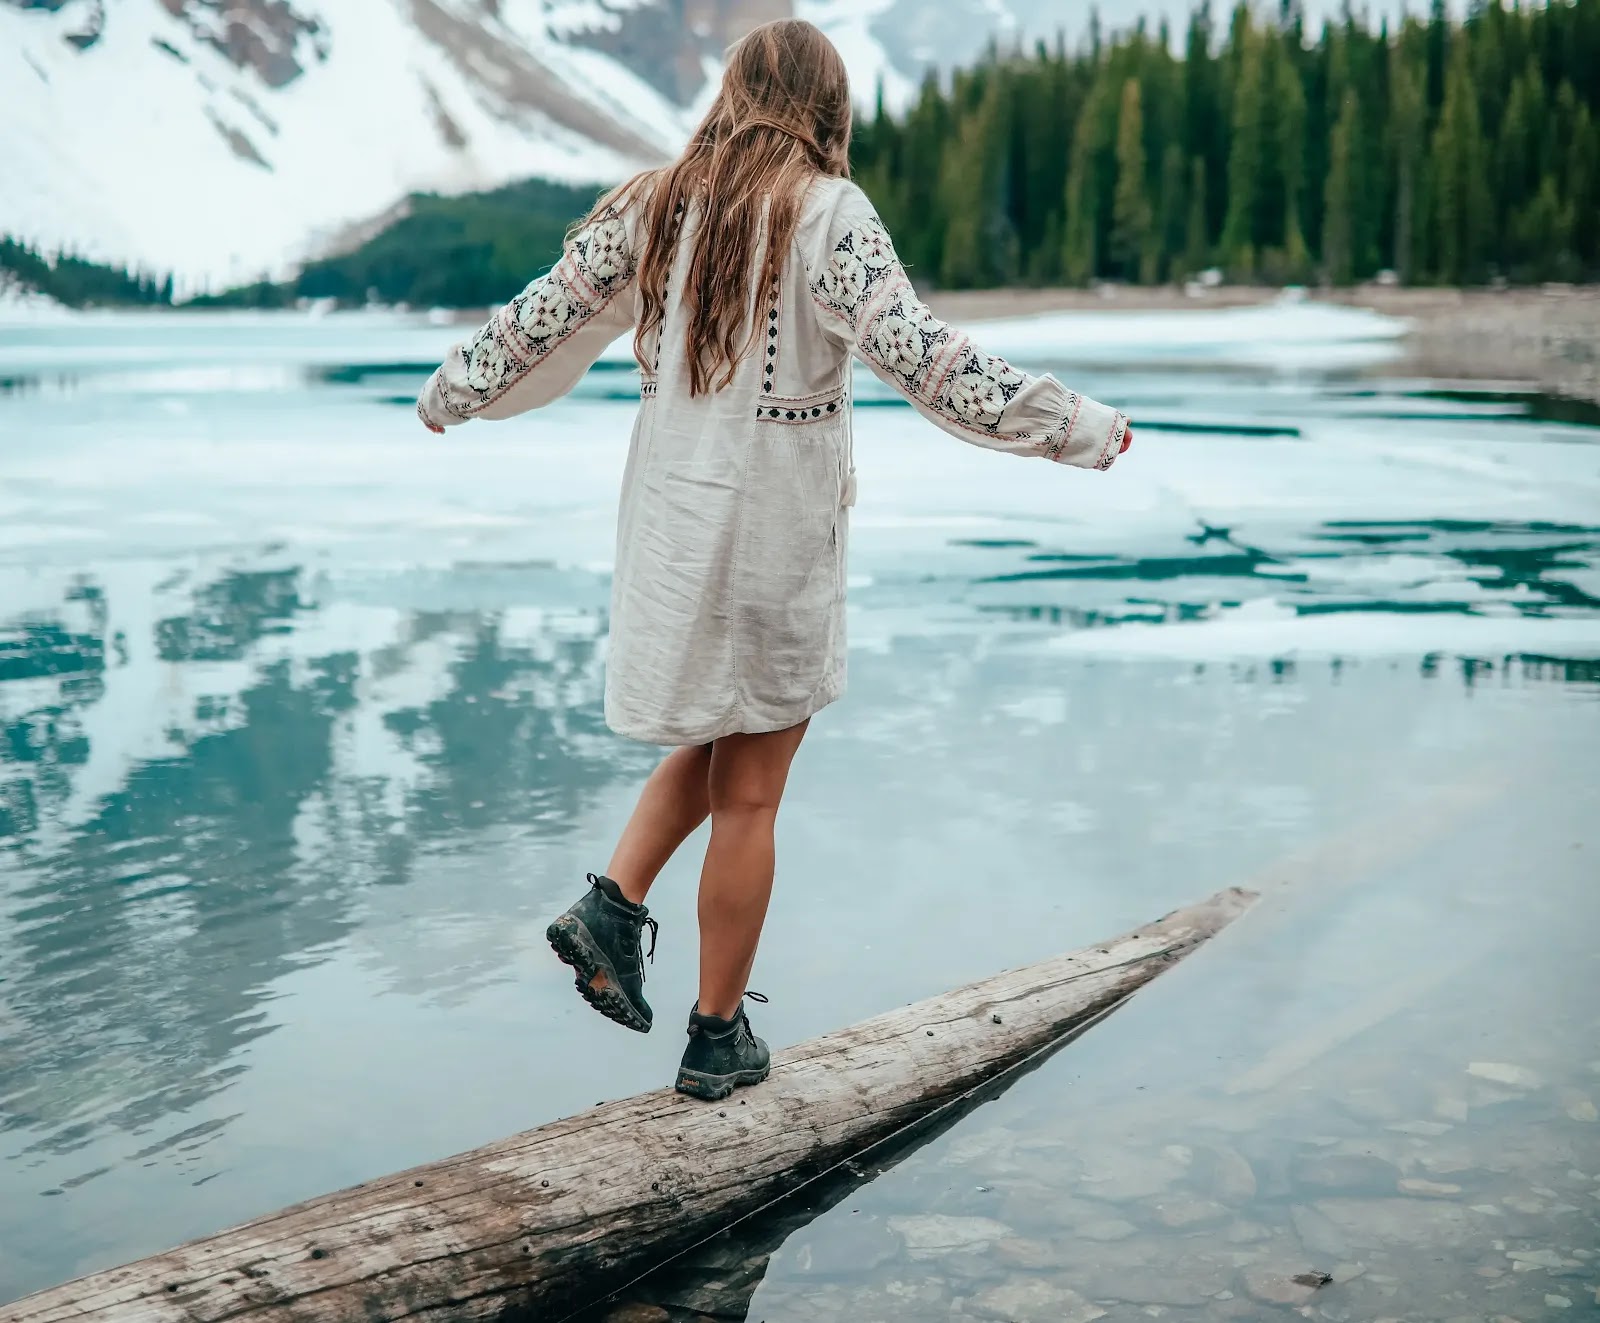 The image contains a woman walking on a log to explore herself.